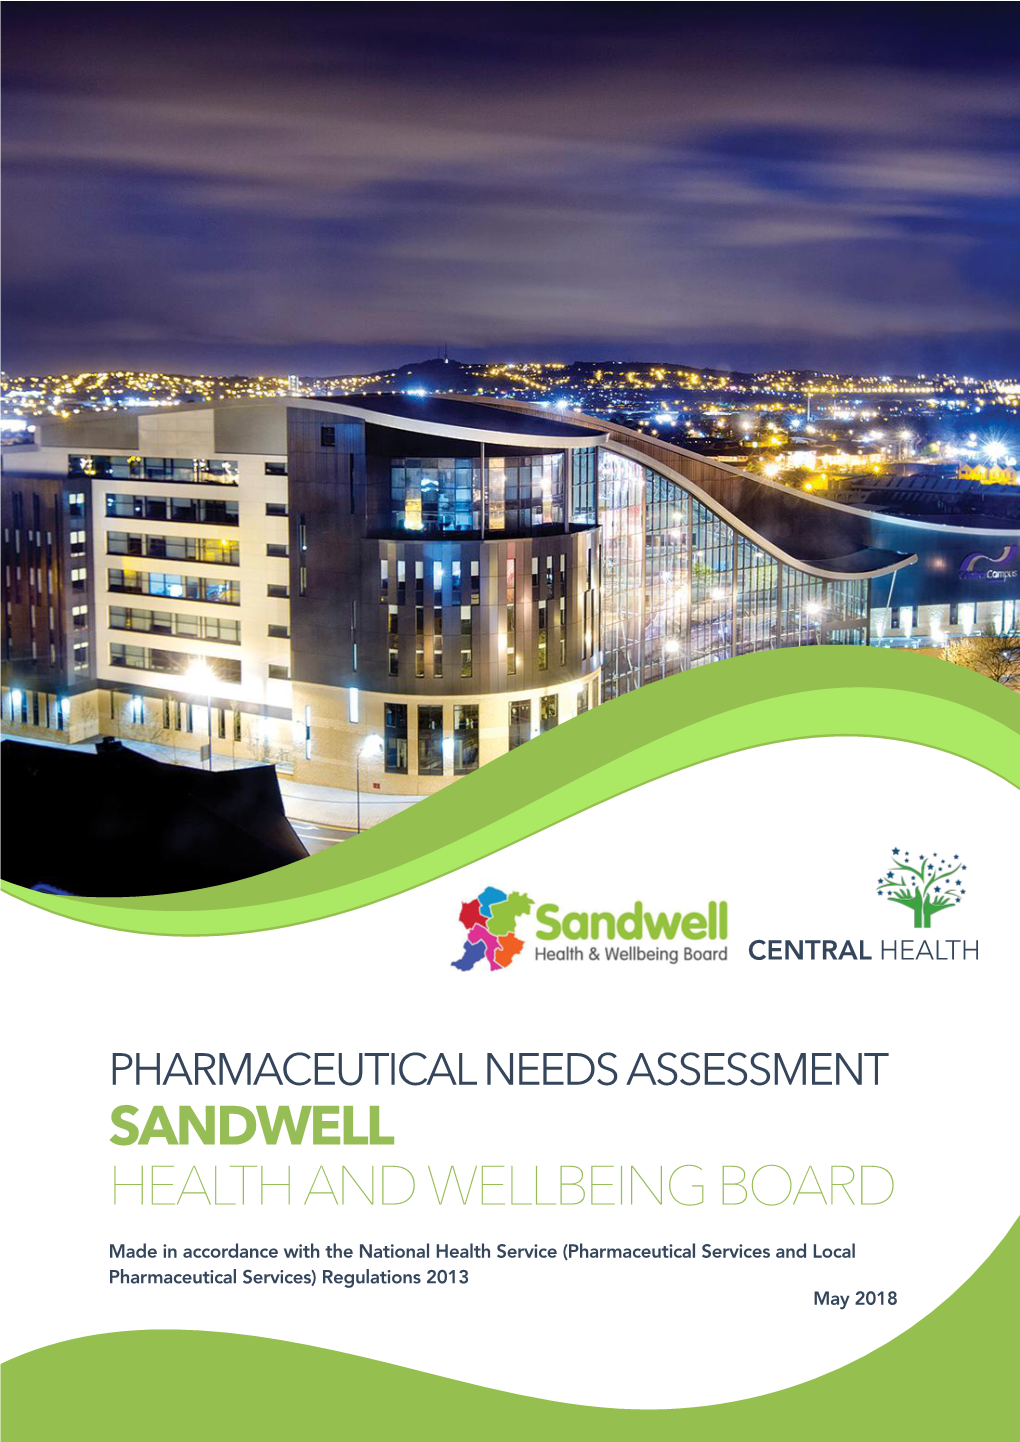 Sandwell Health and Wellbeing Board